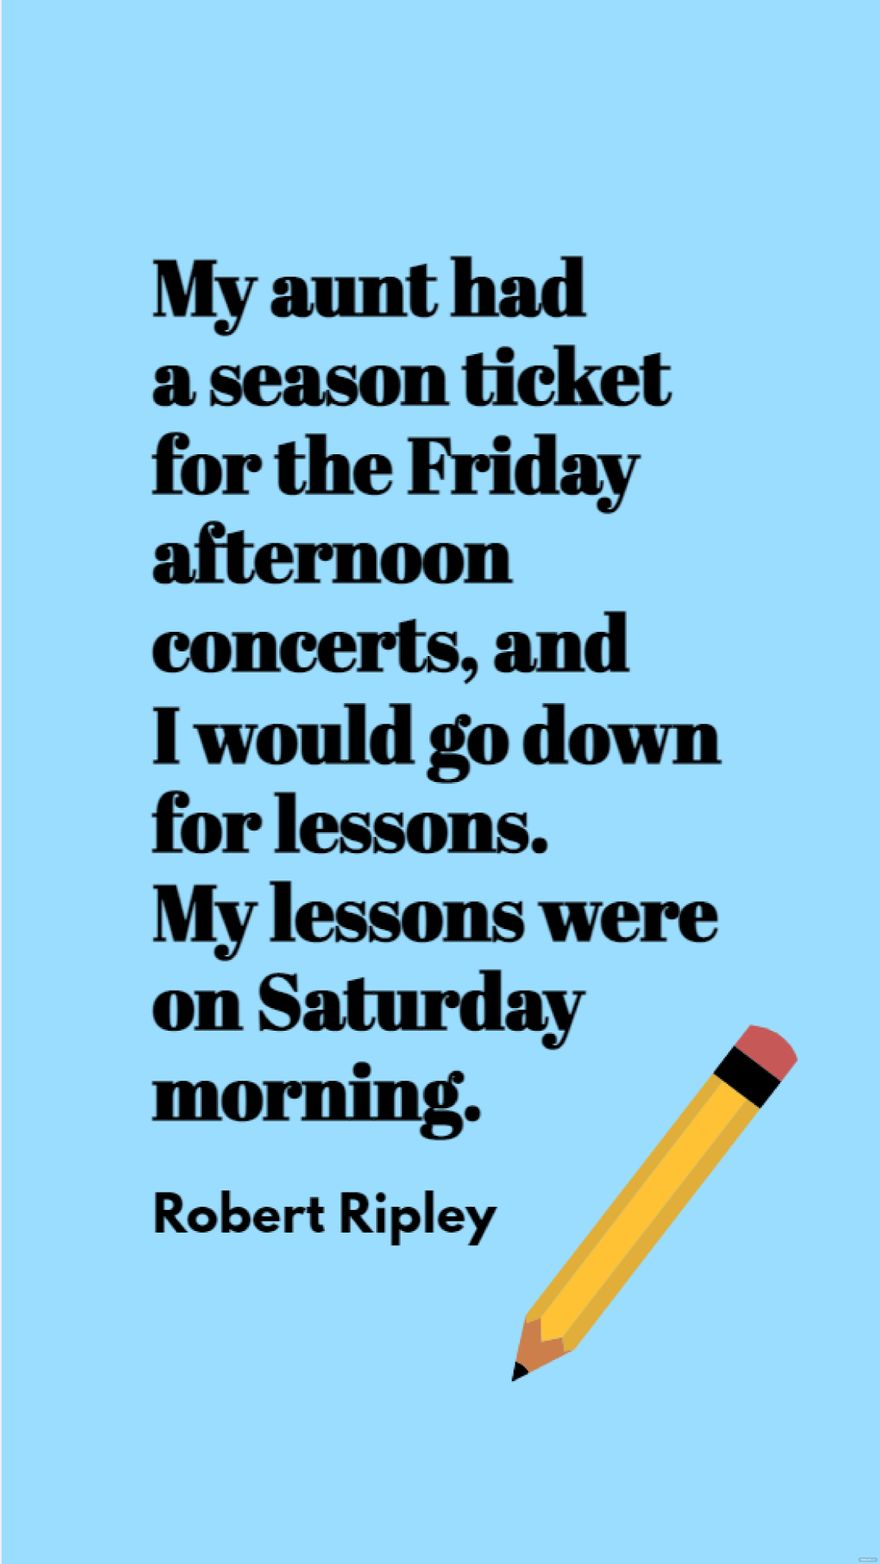 Robert Ripley - My aunt had a season ticket for the Friday afternoon concerts, and I would go down for lessons. My lessons were on Saturday morning.